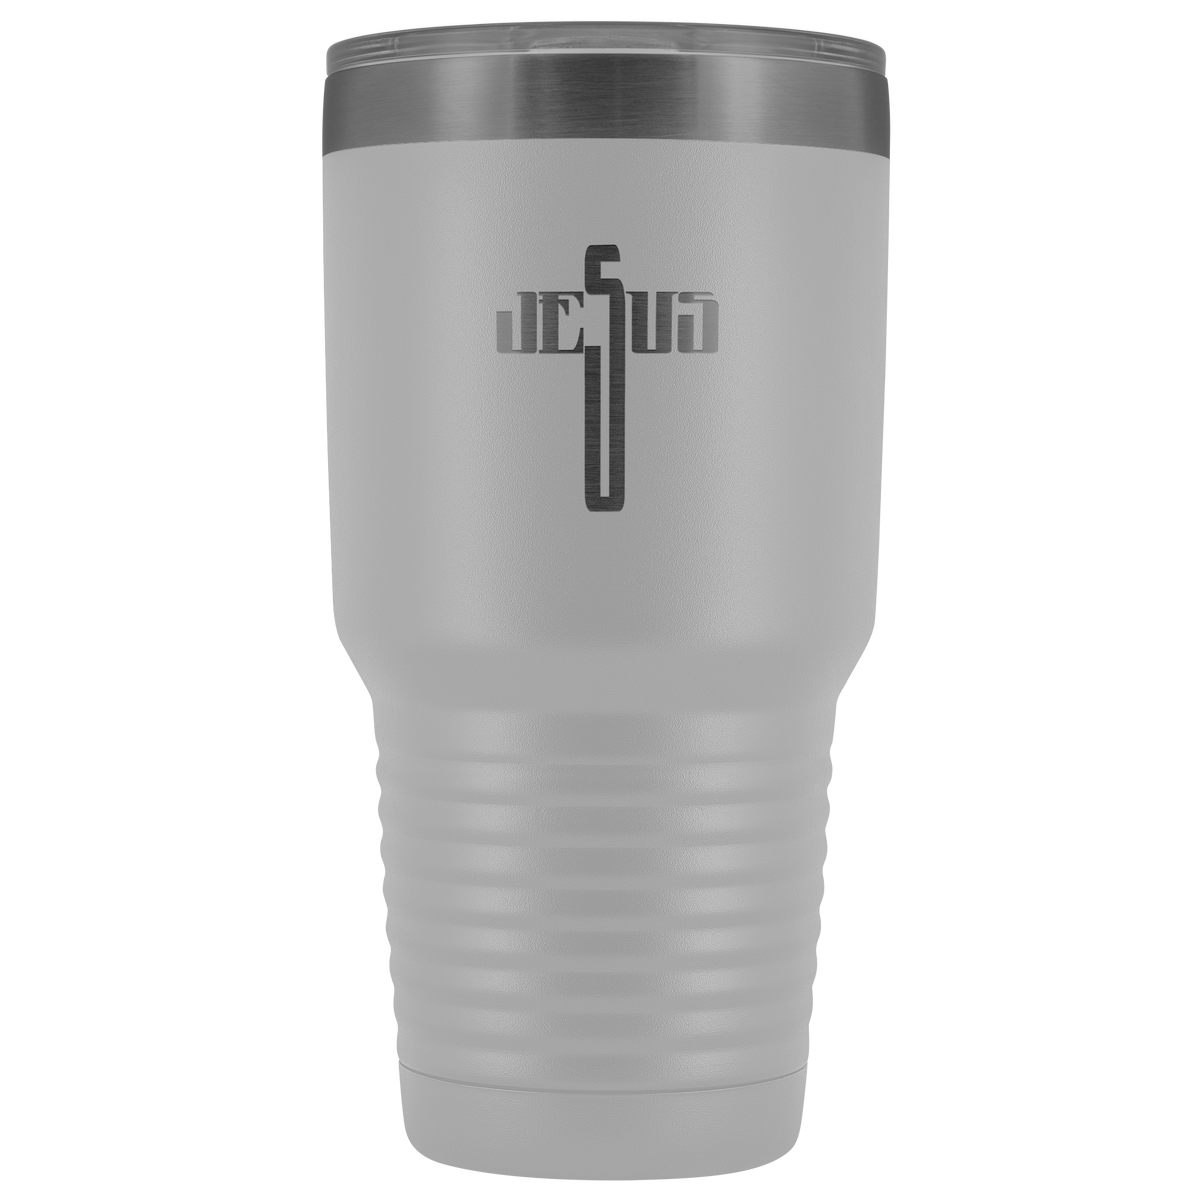 Jesus cross stainless steel vacuum insulated hot and cold beverage container